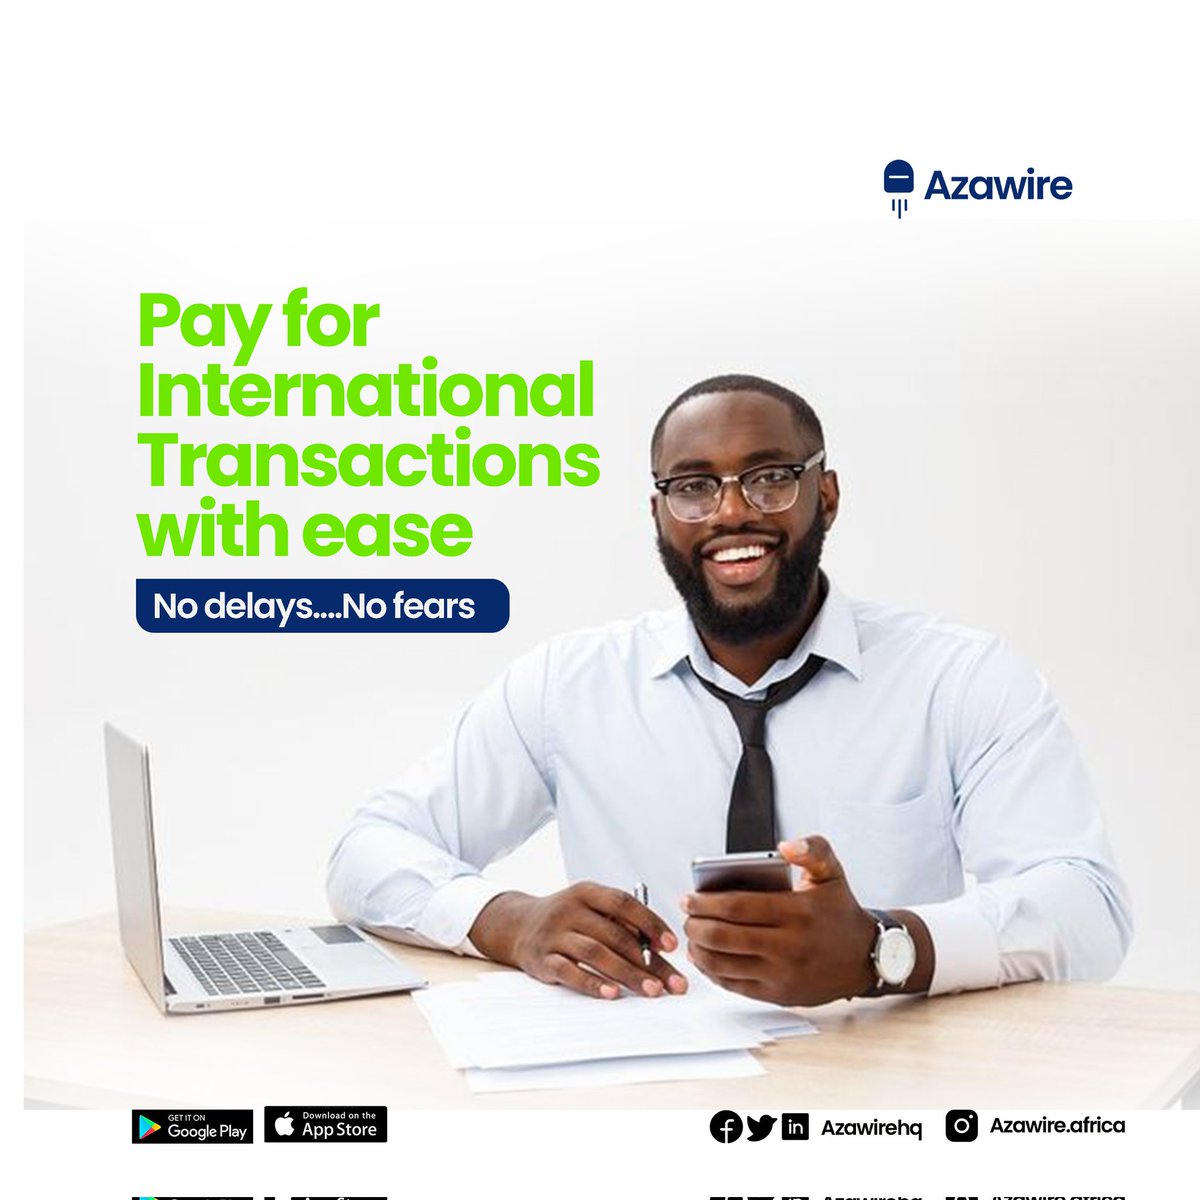 It's Saturday

Navigate international transactions on
The Azawire app.

Free of delays, hassles ad high fees.

Another way to experience borderless banking.

.
.
.
#azawire #azapay
#technololix #fintech 
#fintechstartup #Teleferik